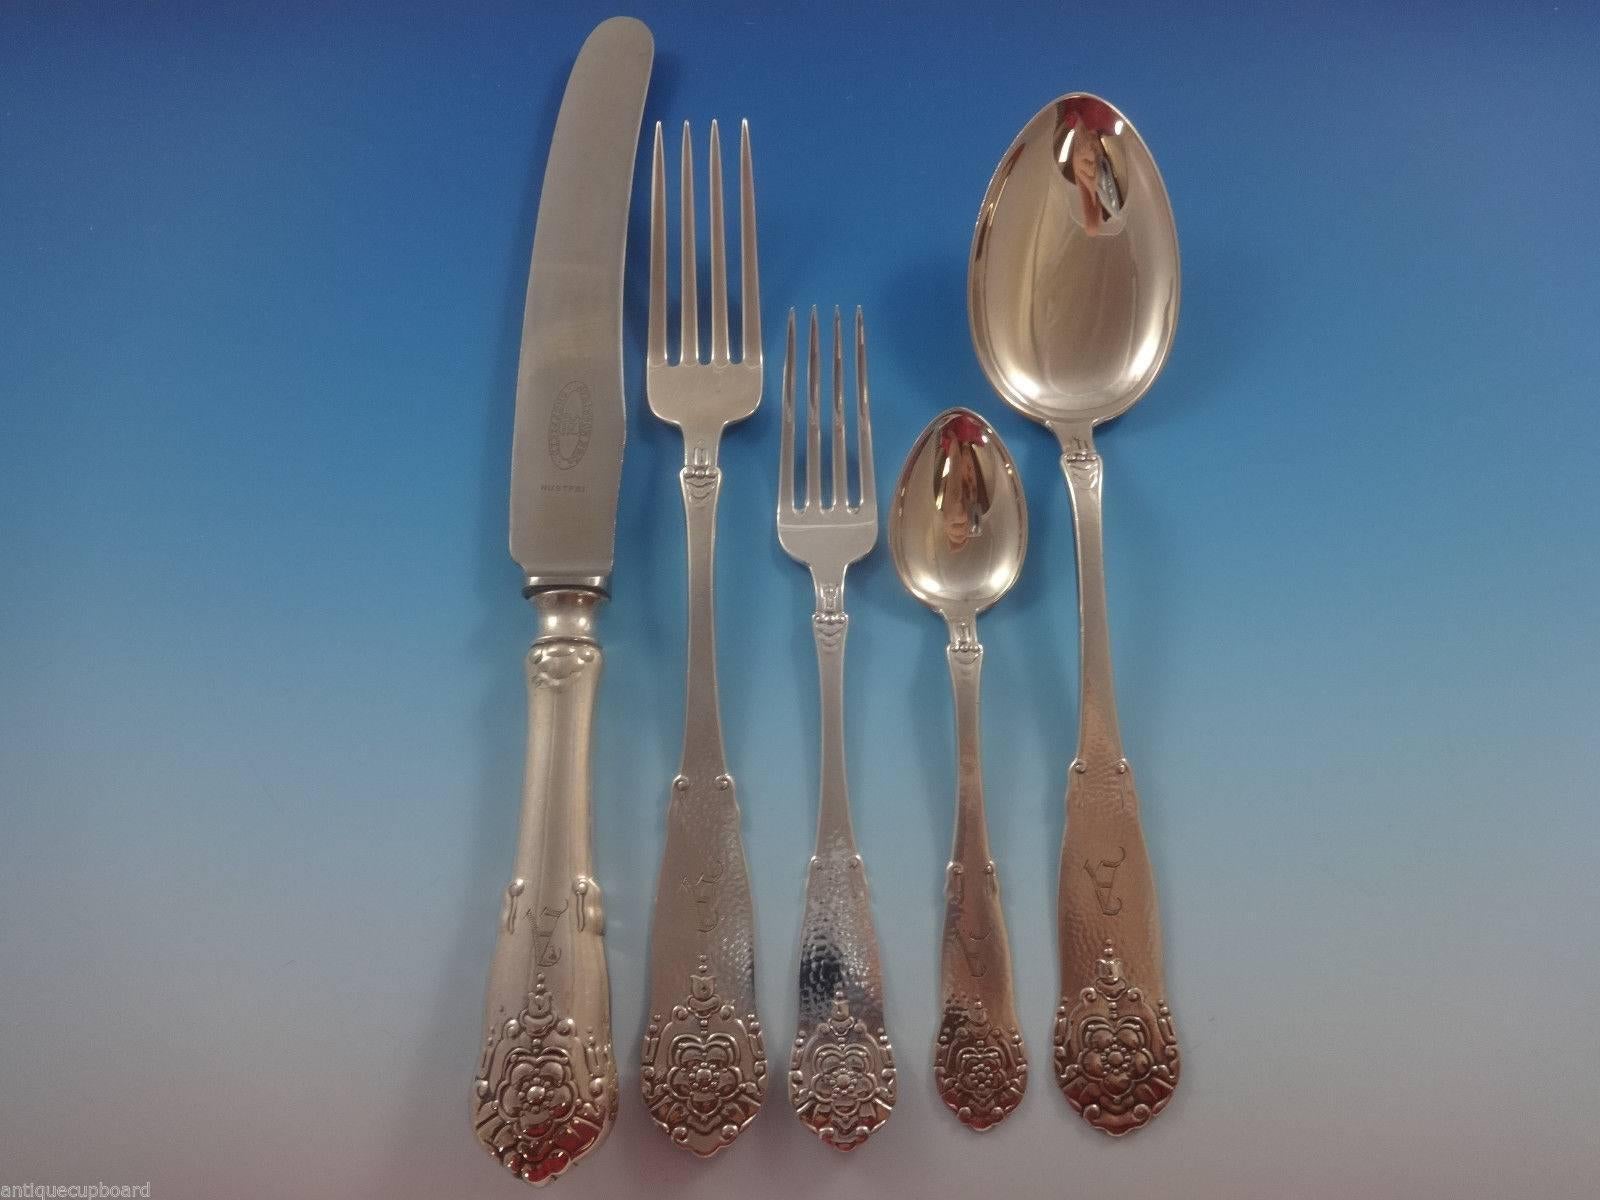 HARDANGER BY TH. OLSENS Scandinavian 830 silver Flatware set, hand hammered with dahlia-style flower - 41 Pieces. This set includes:

8 DINNER KNIVES, 9 3/4